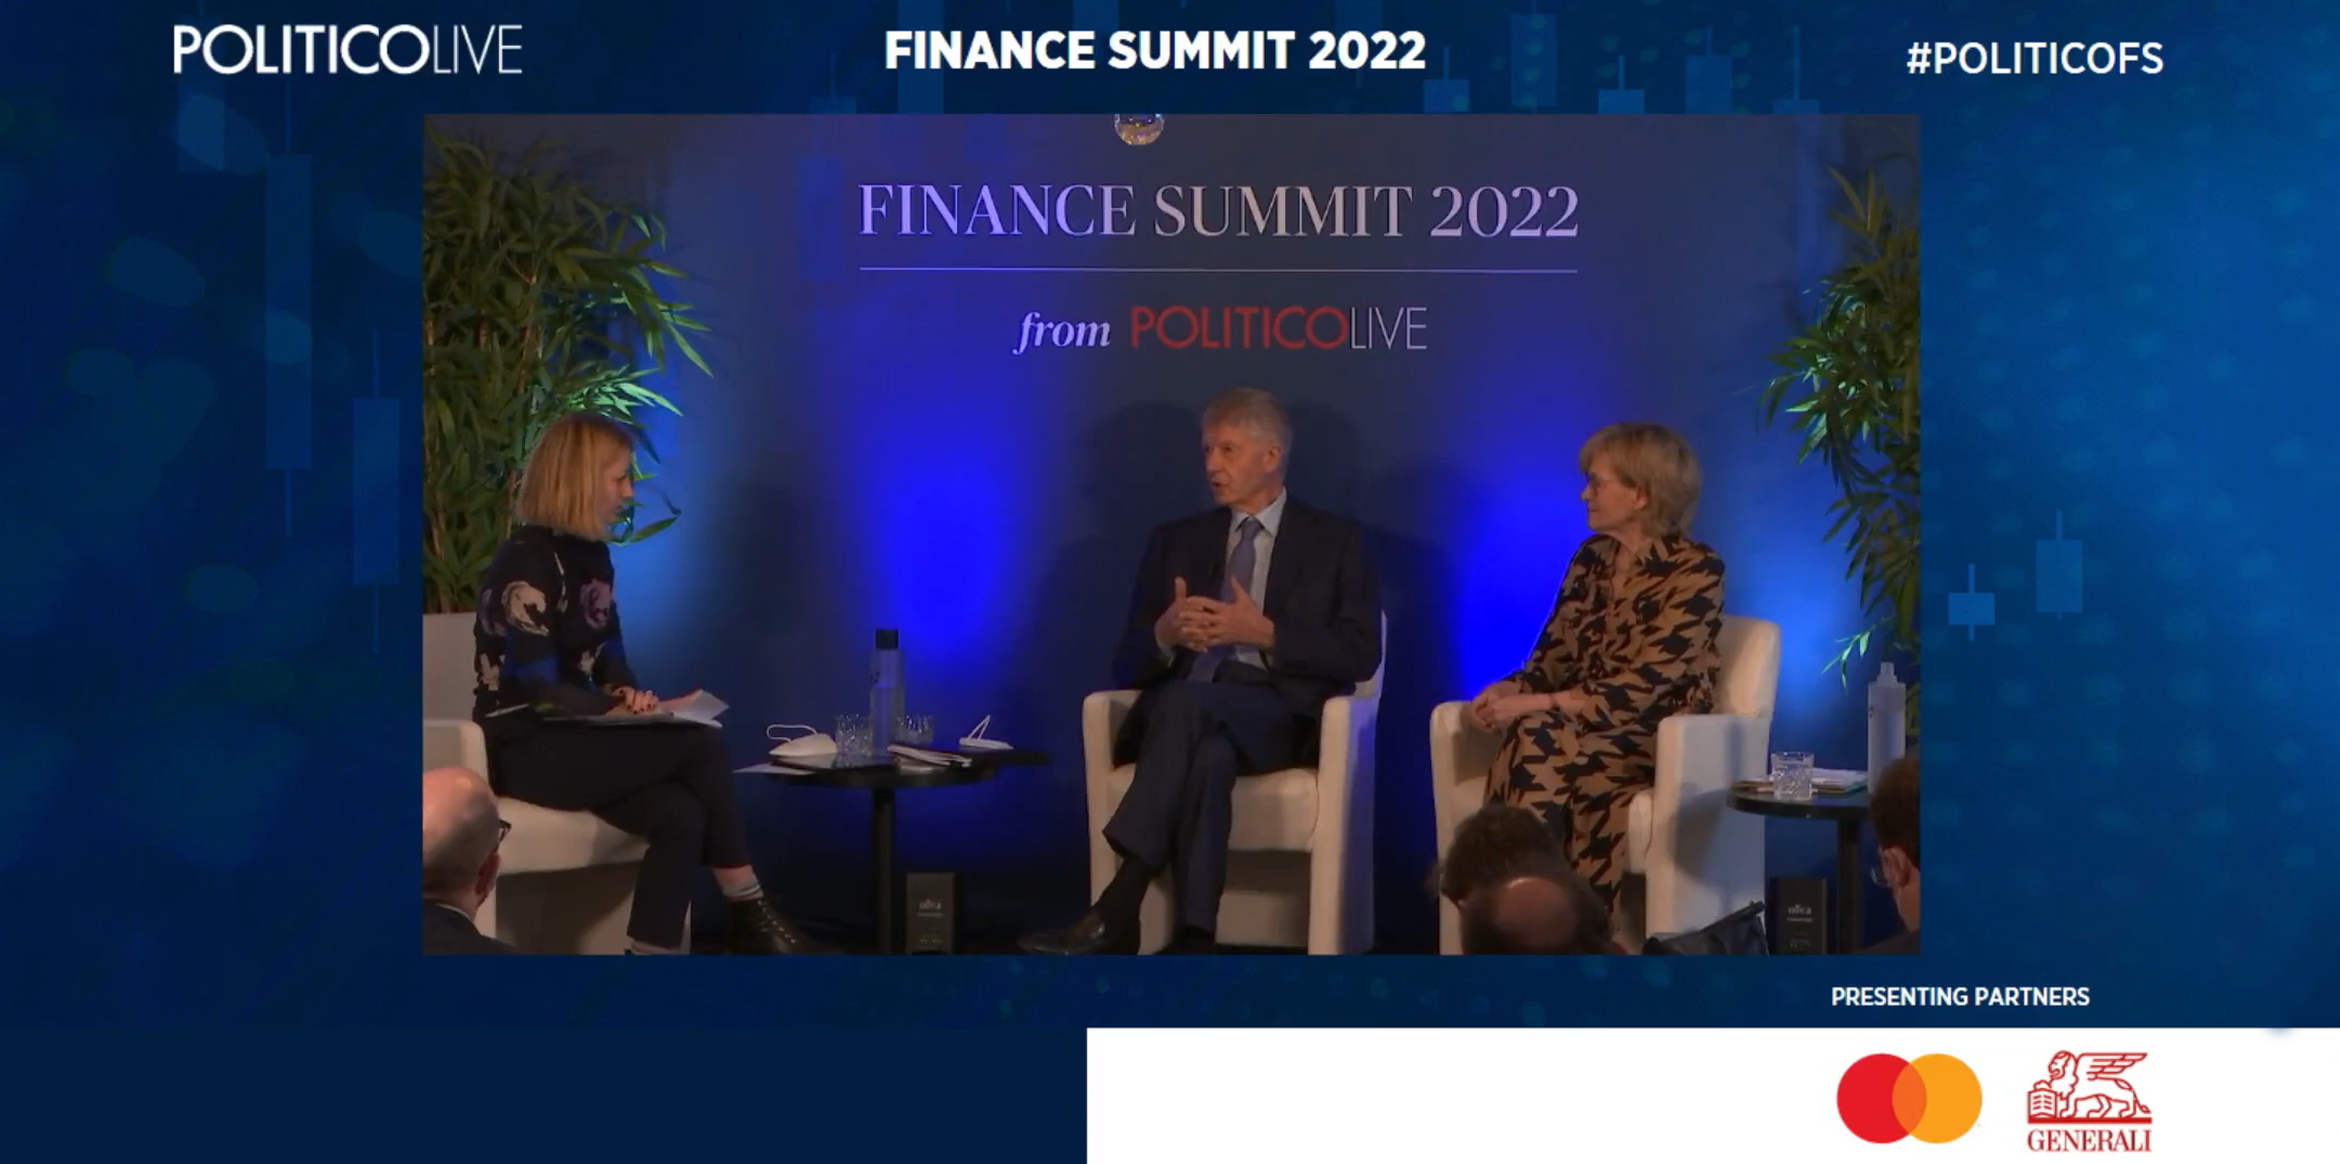 Inflation, Solvency II and sustainability at the heart of the conversation between the Chairman of Generali, Gabriele Galateri, and the European Commissioner for Financial Services, Mairead McGuinness